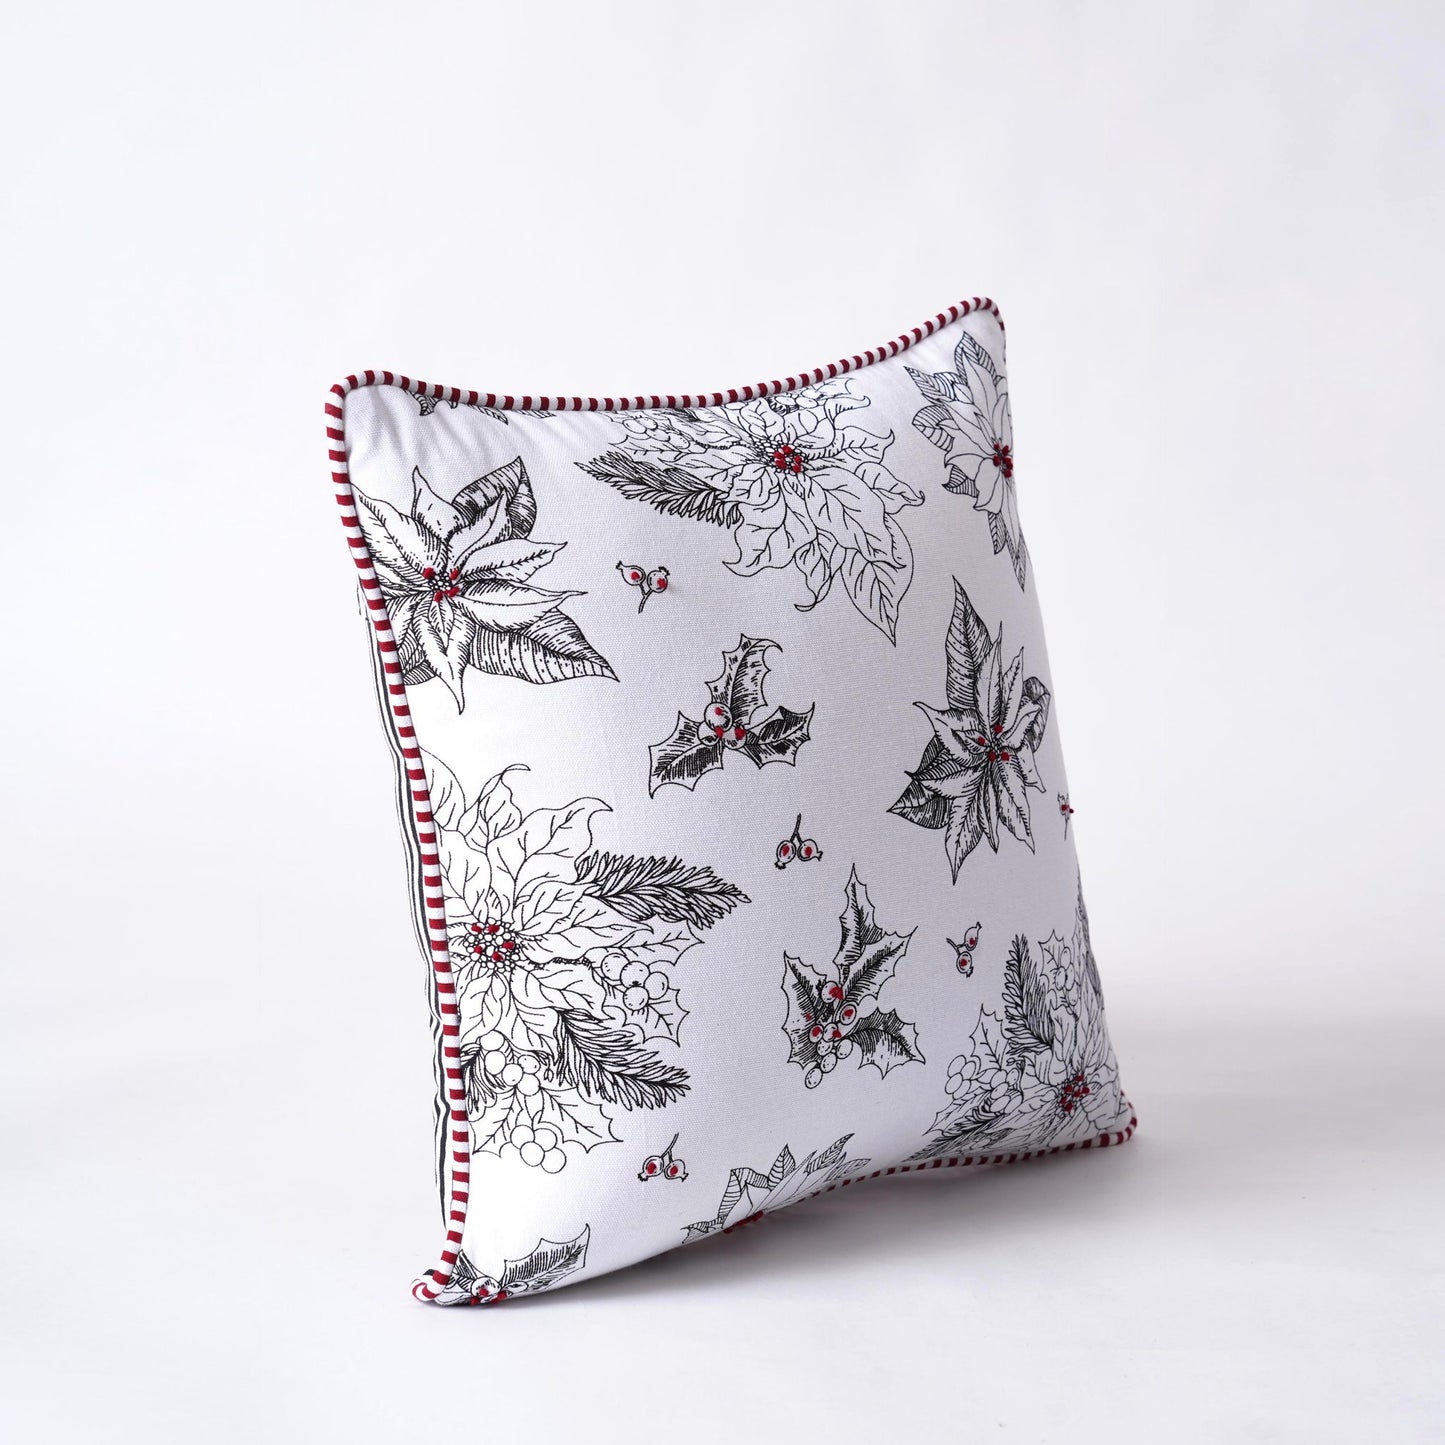 Christmas pillow cover, Poinsettia pattern, black and white, standard size 16X16 inches, other sizes available